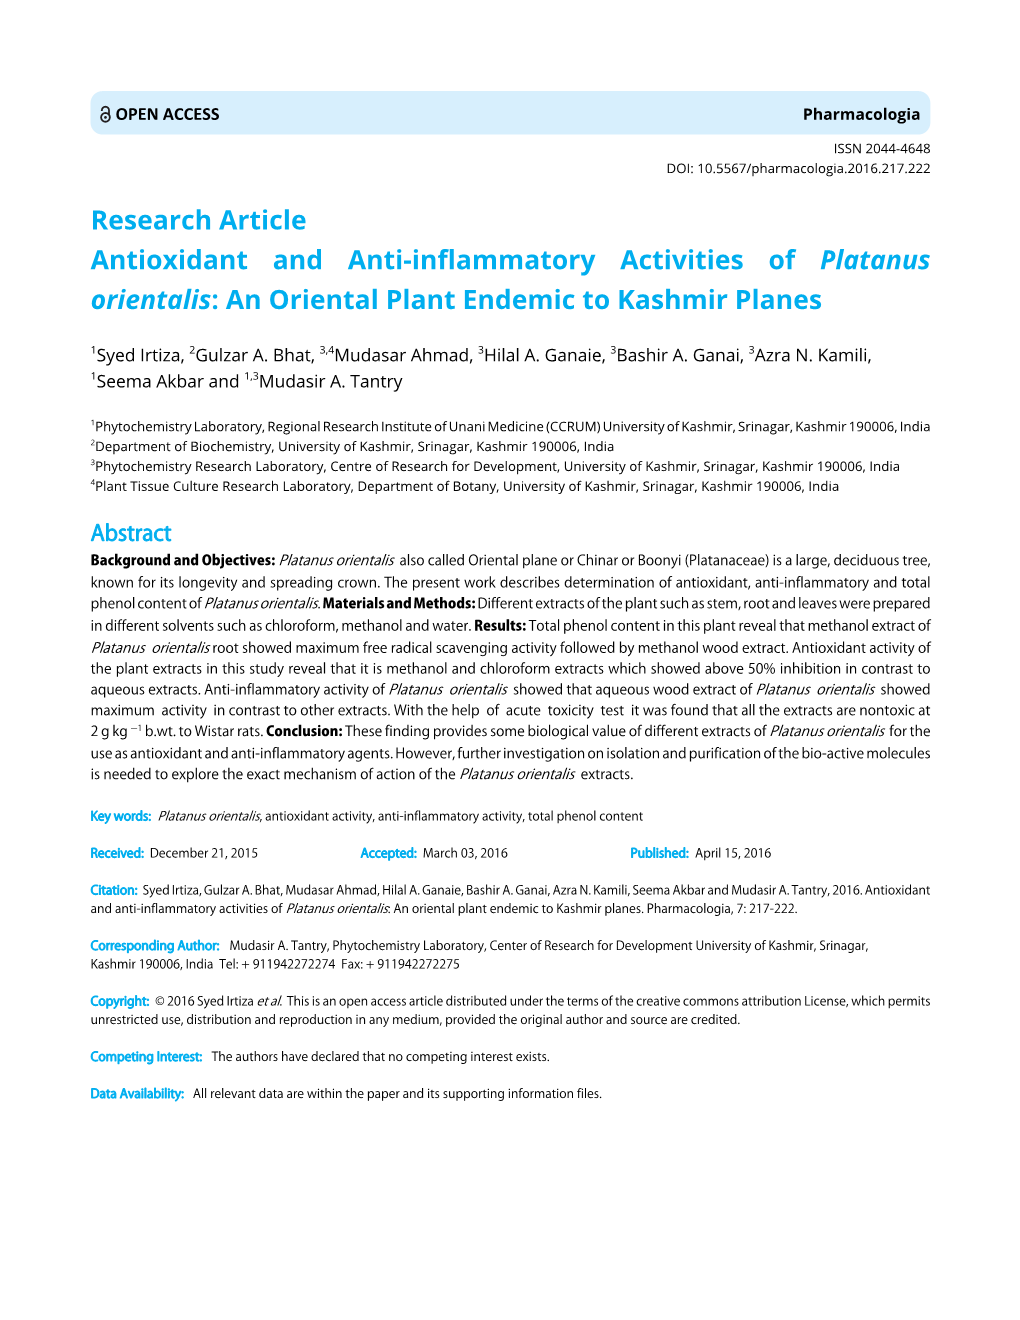 Antioxidant and Anti-Inflammatory Activities of Platanus Orientalis: an Oriental Plant Endemic to Kashmir Planes